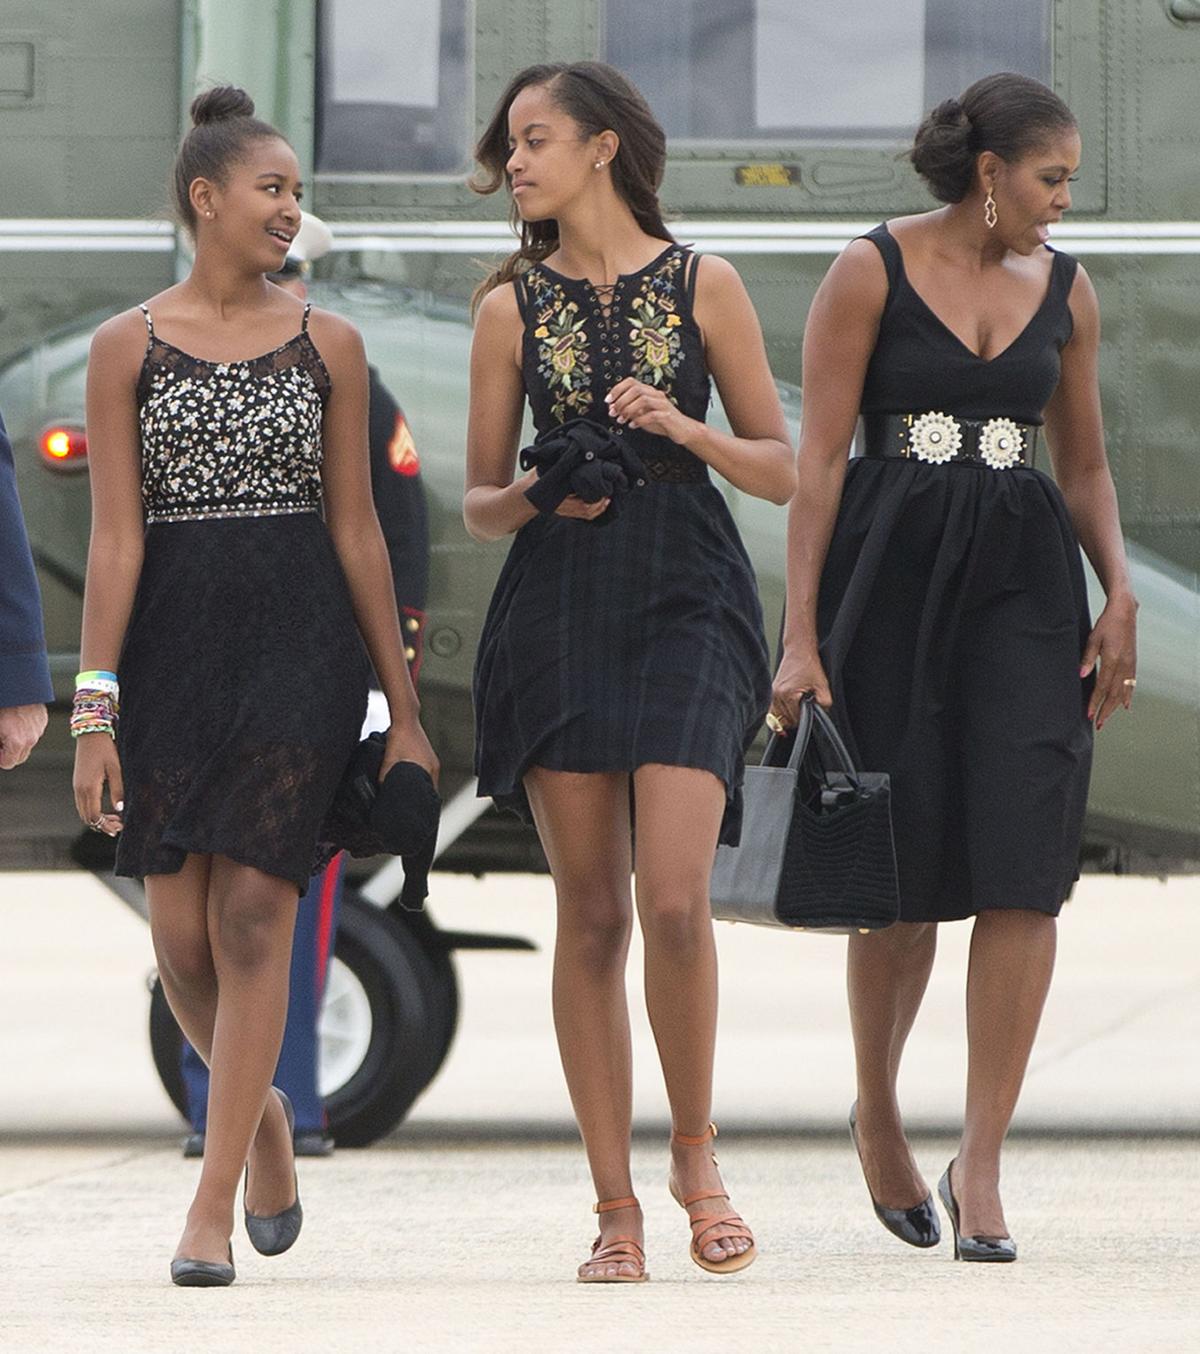 Photos First Daughters Malia And Sasha Obama Through The Years Govt And Politics 